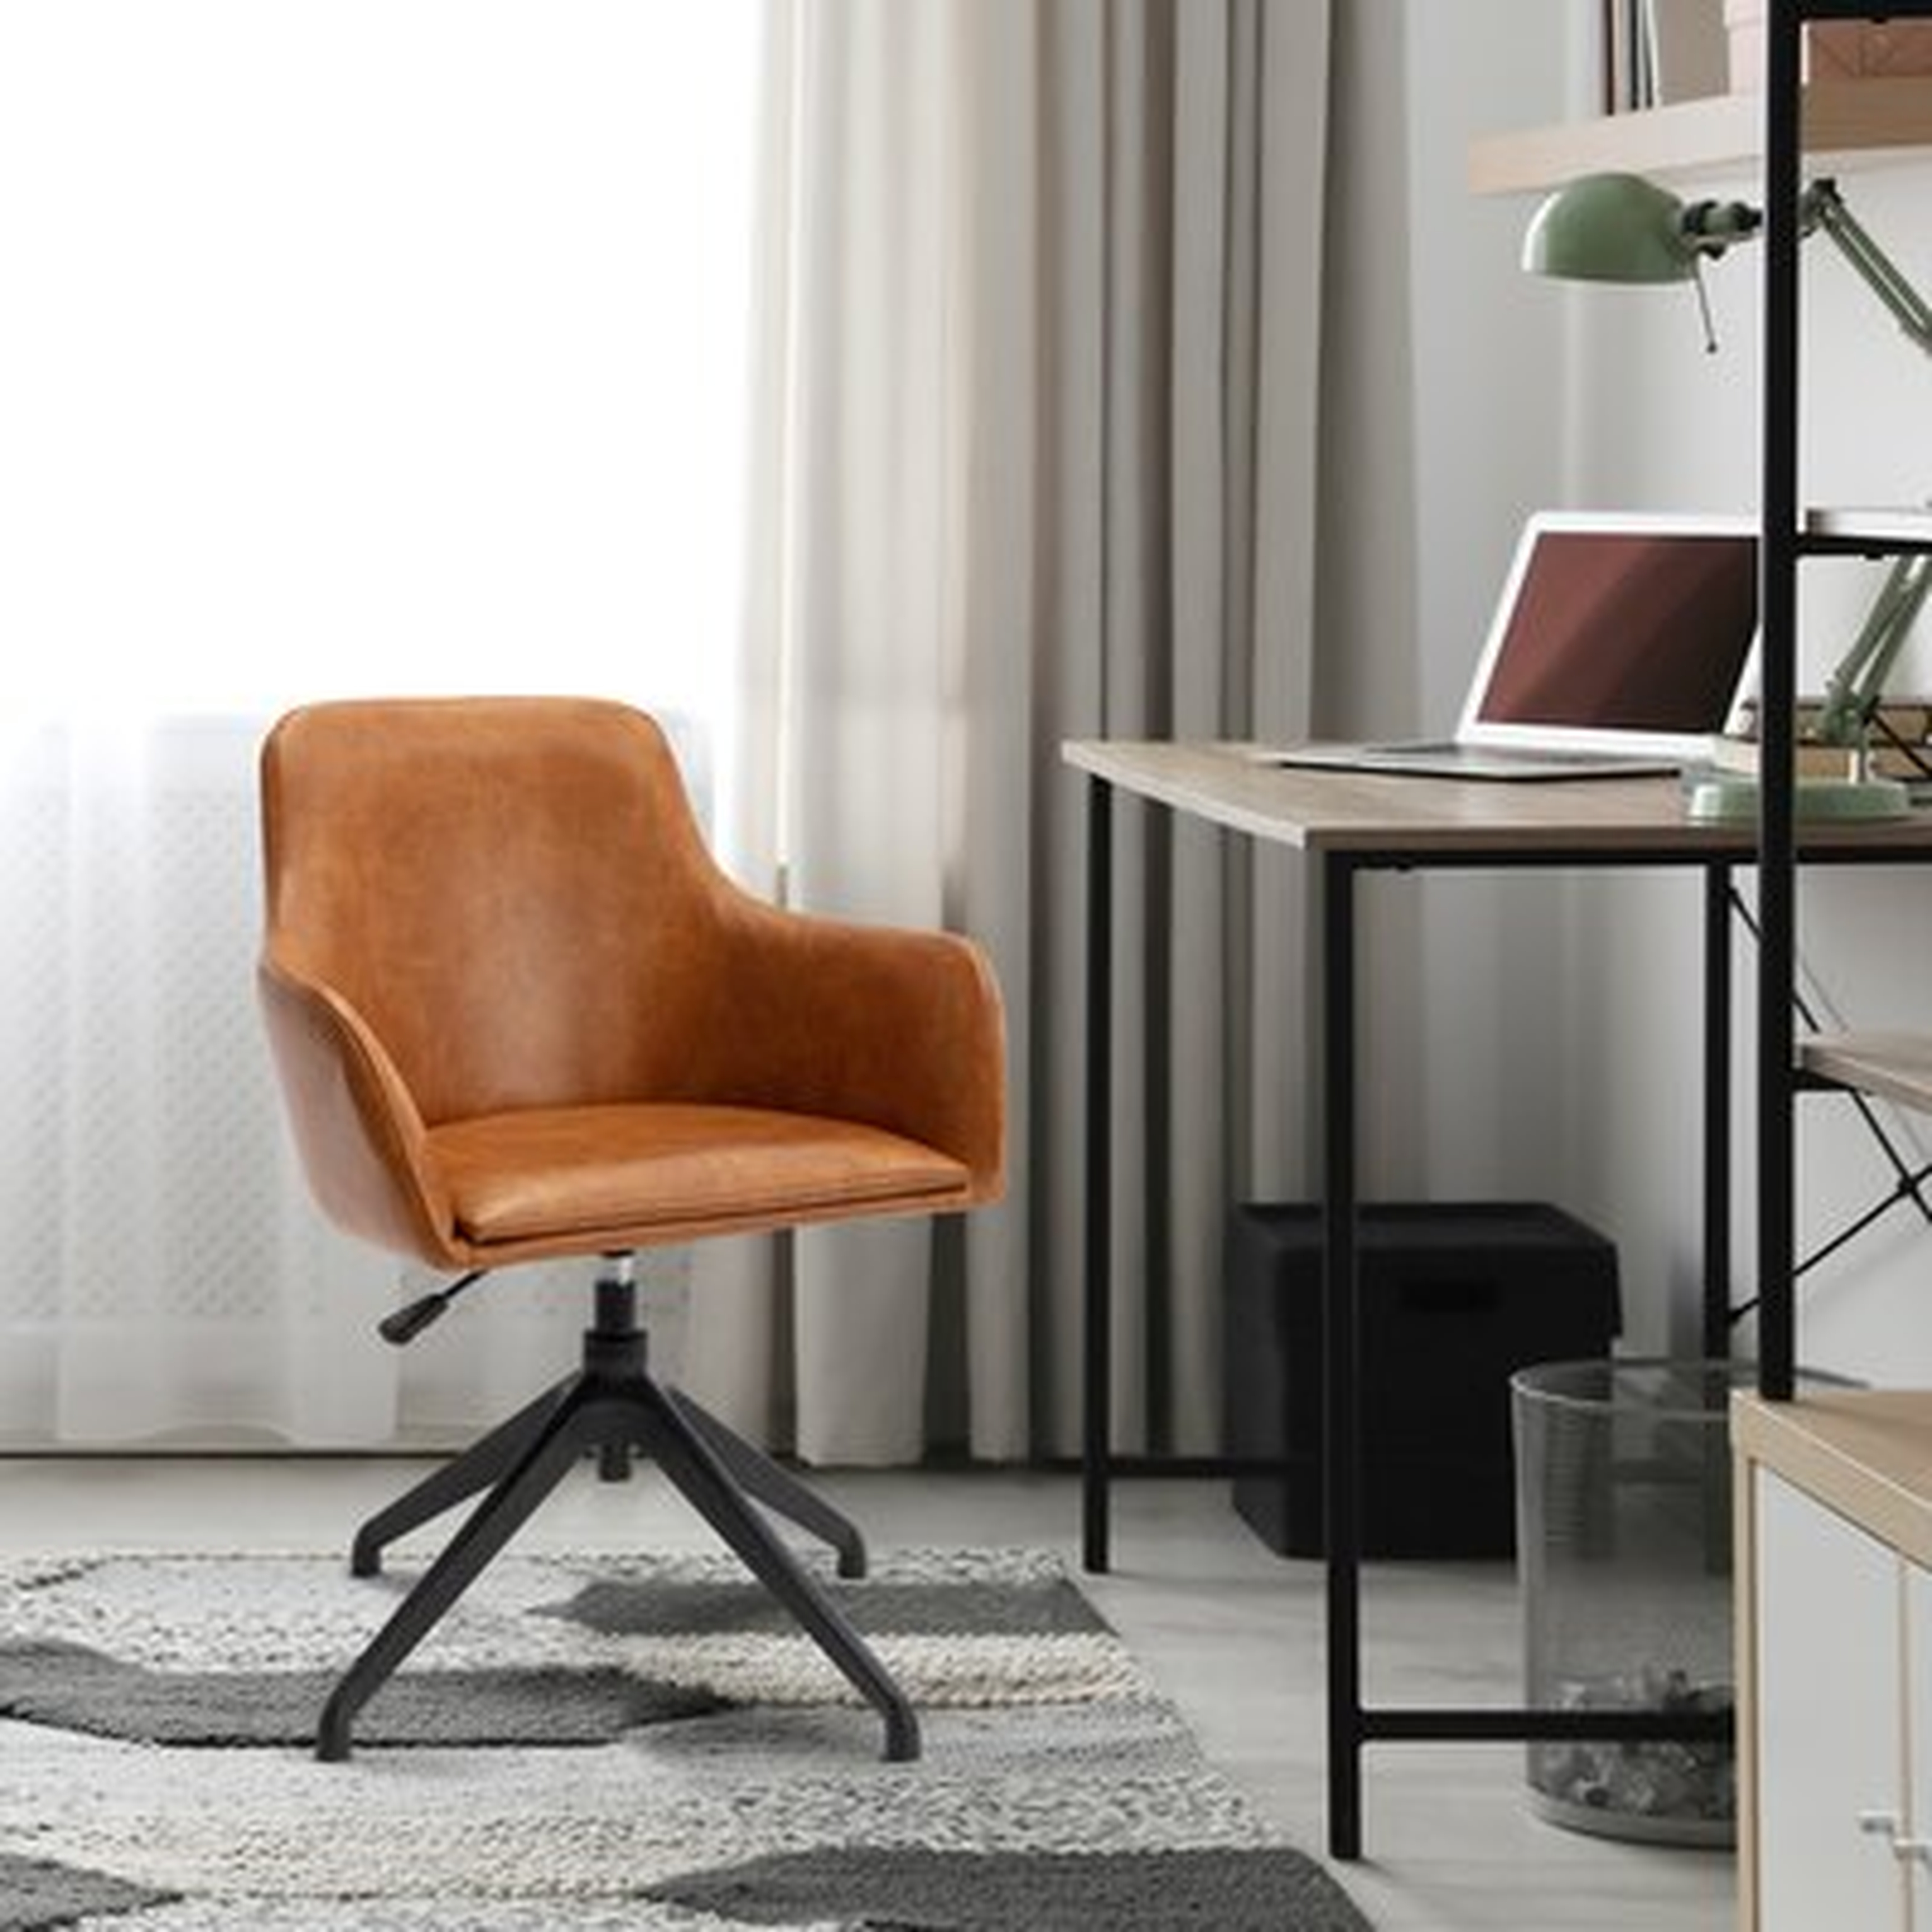 Adella Conference Chair - Wayfair